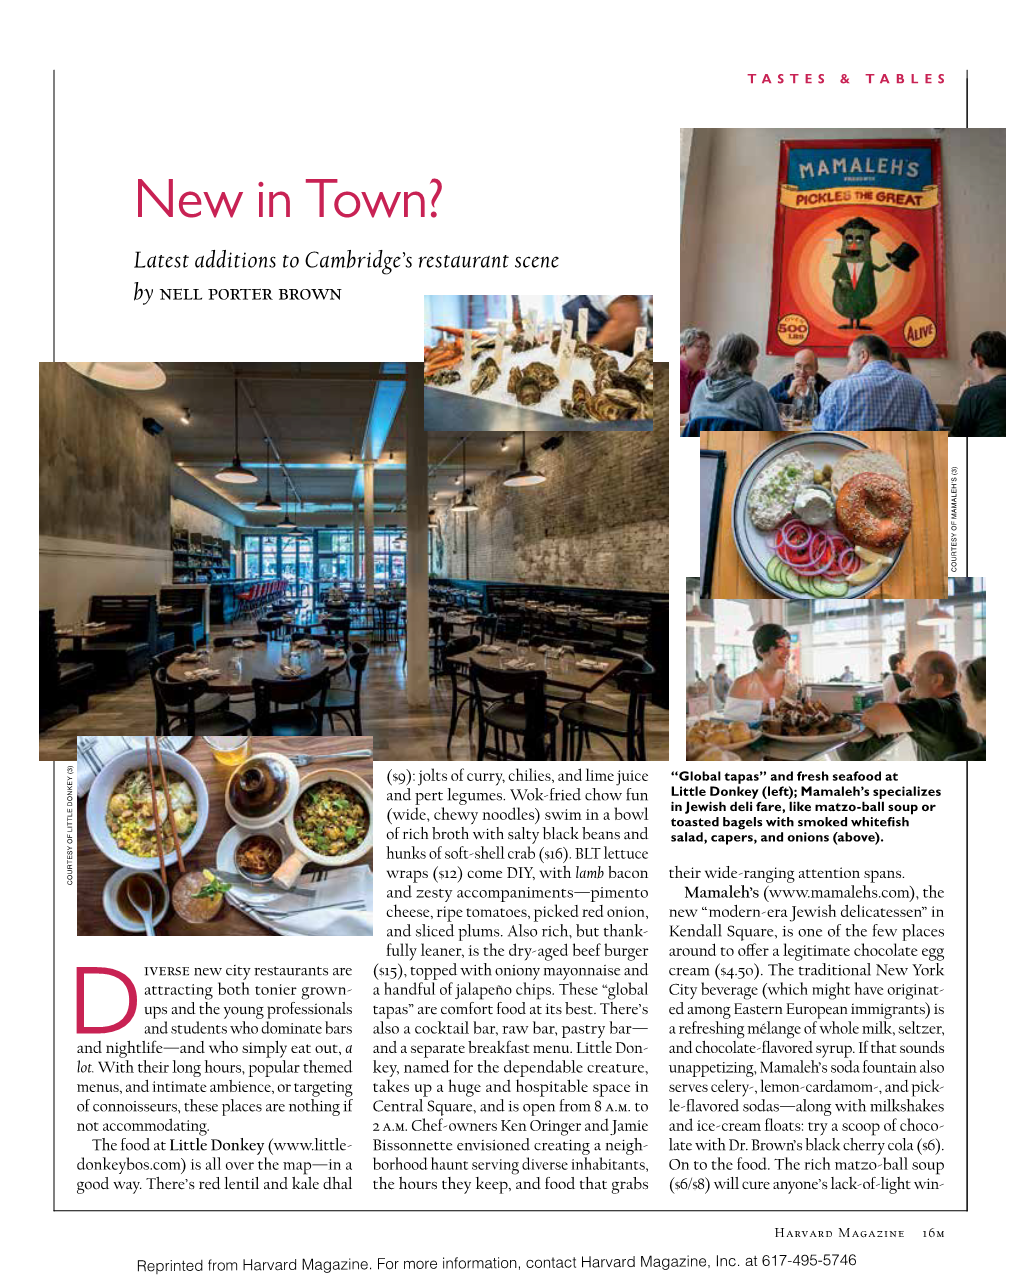 New in Town? Latest Additions to Cambridge’S Restaurant Scene by Nell Porter Brown COURTESY of MAMALEH’S (3)